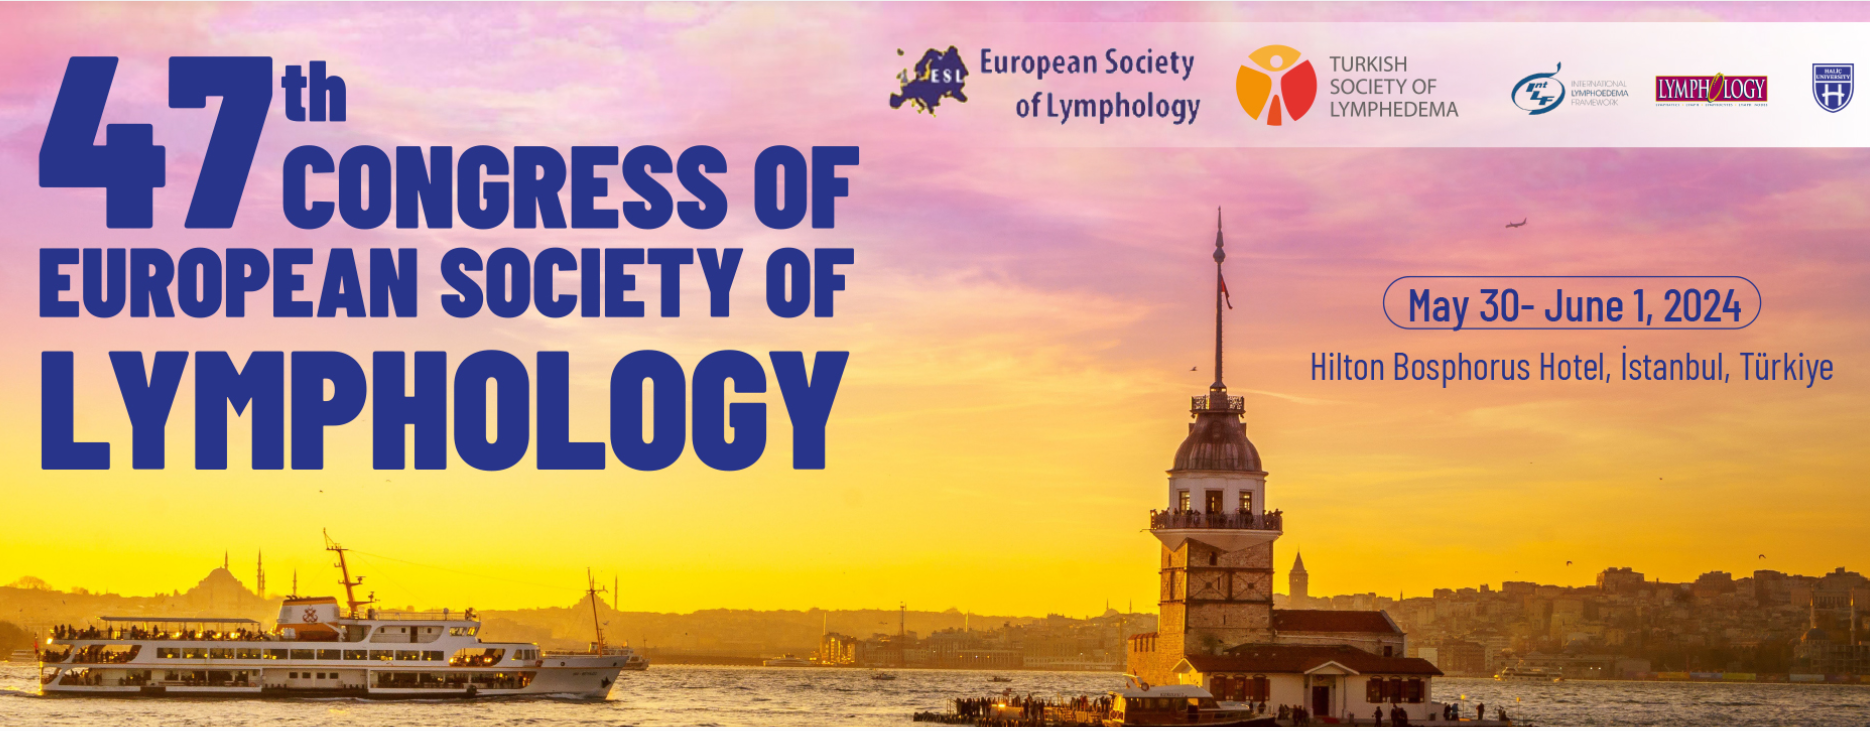 47th Congress of European Society of Lymphology